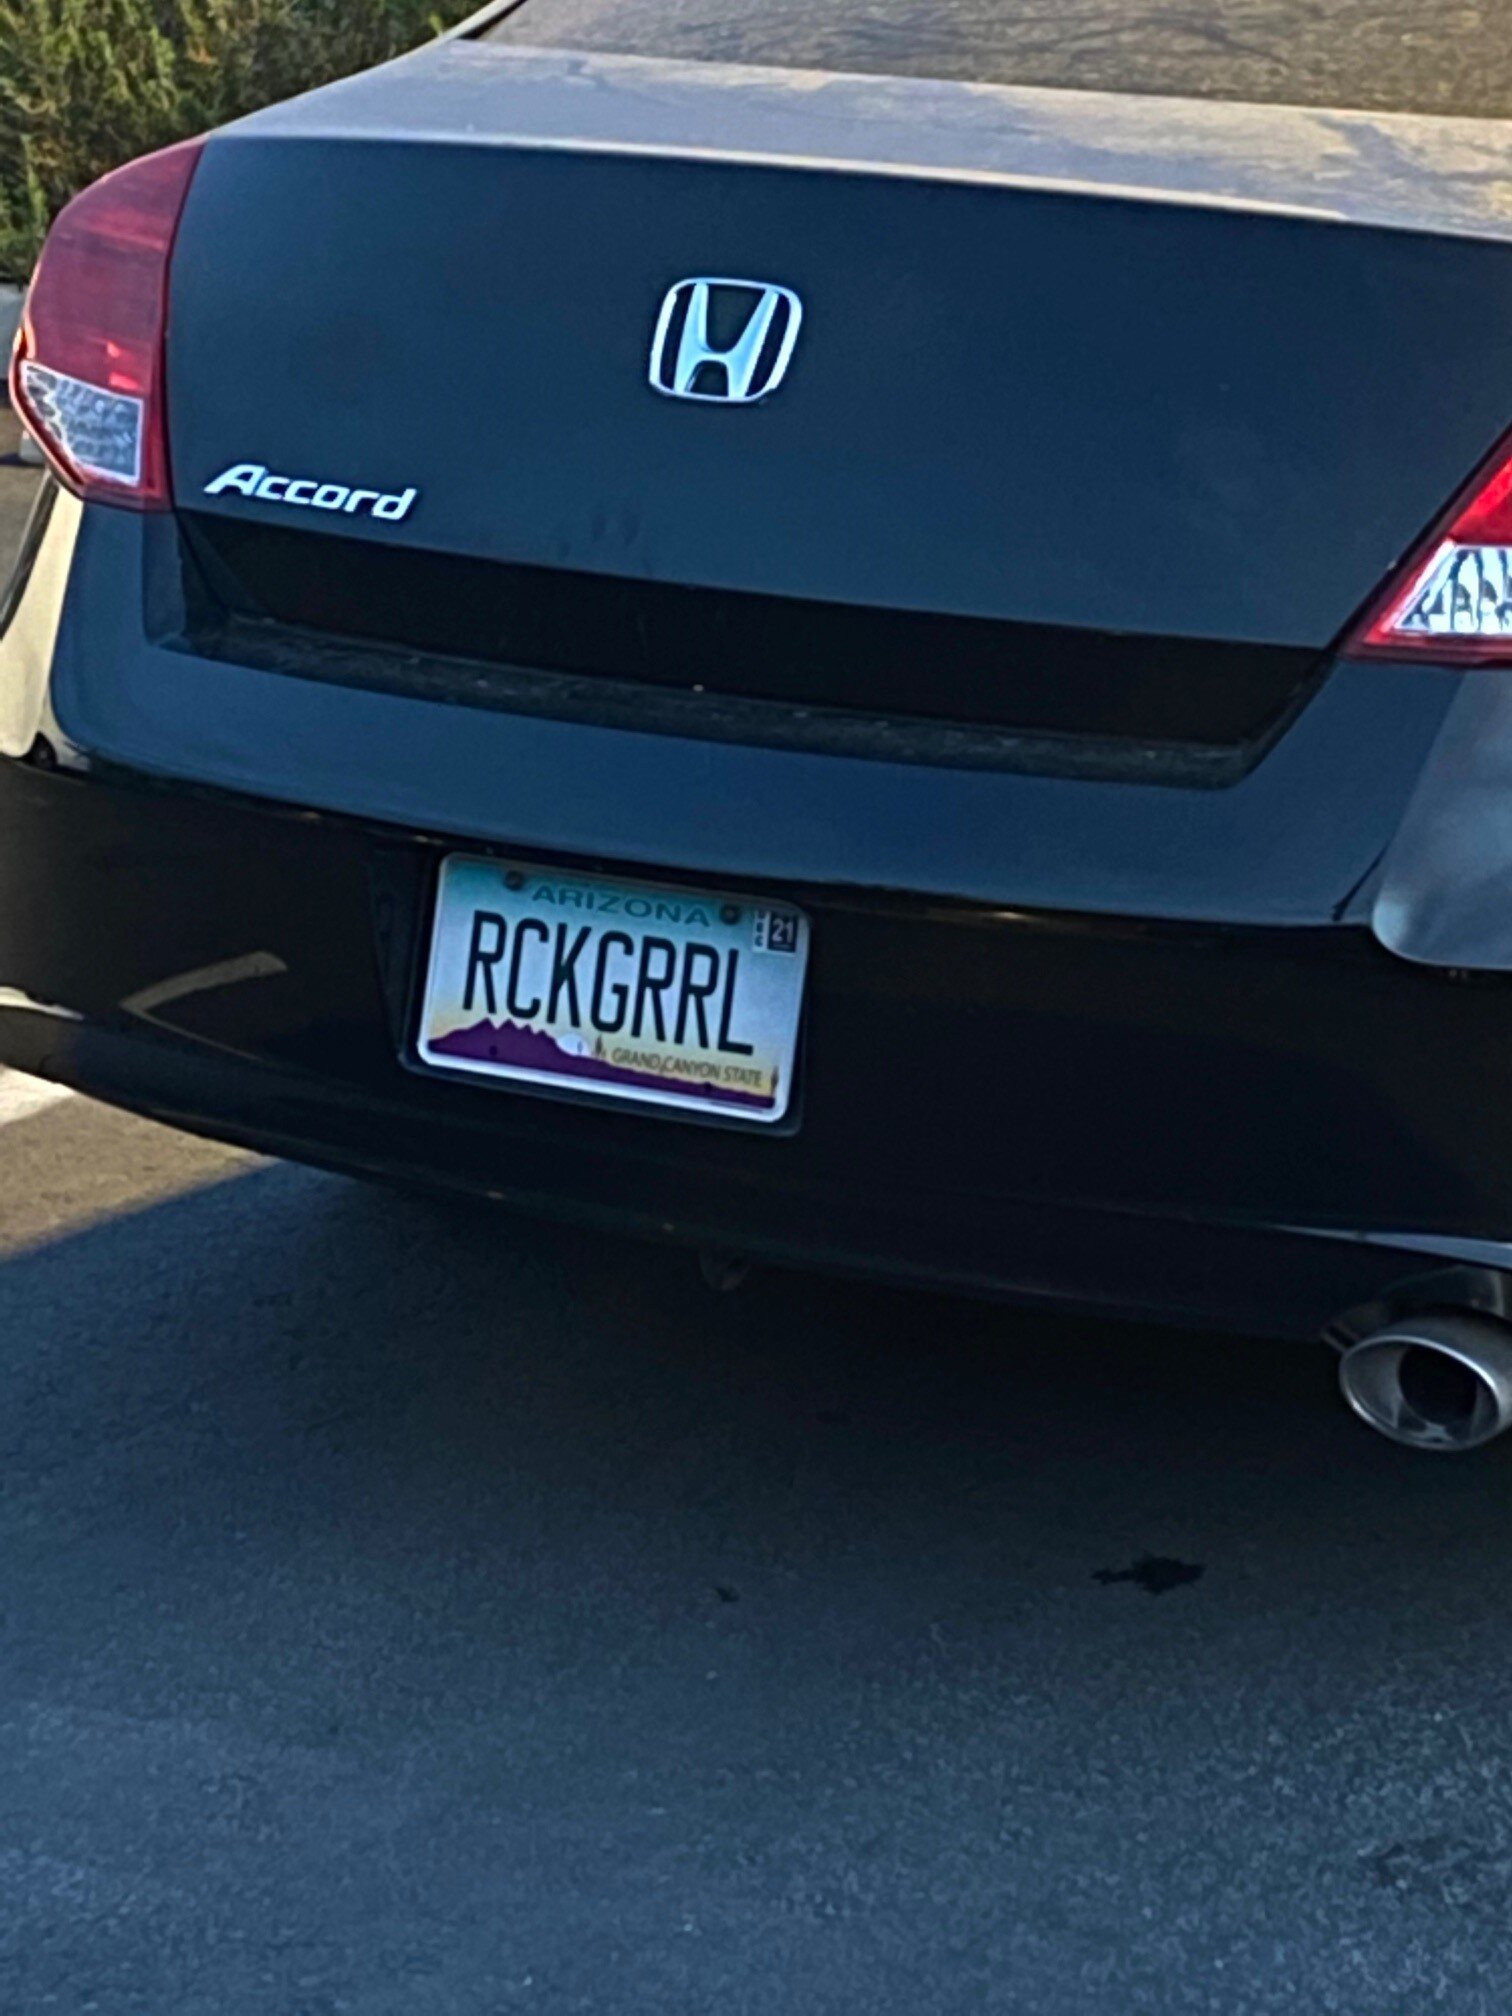 Dig the Plate!